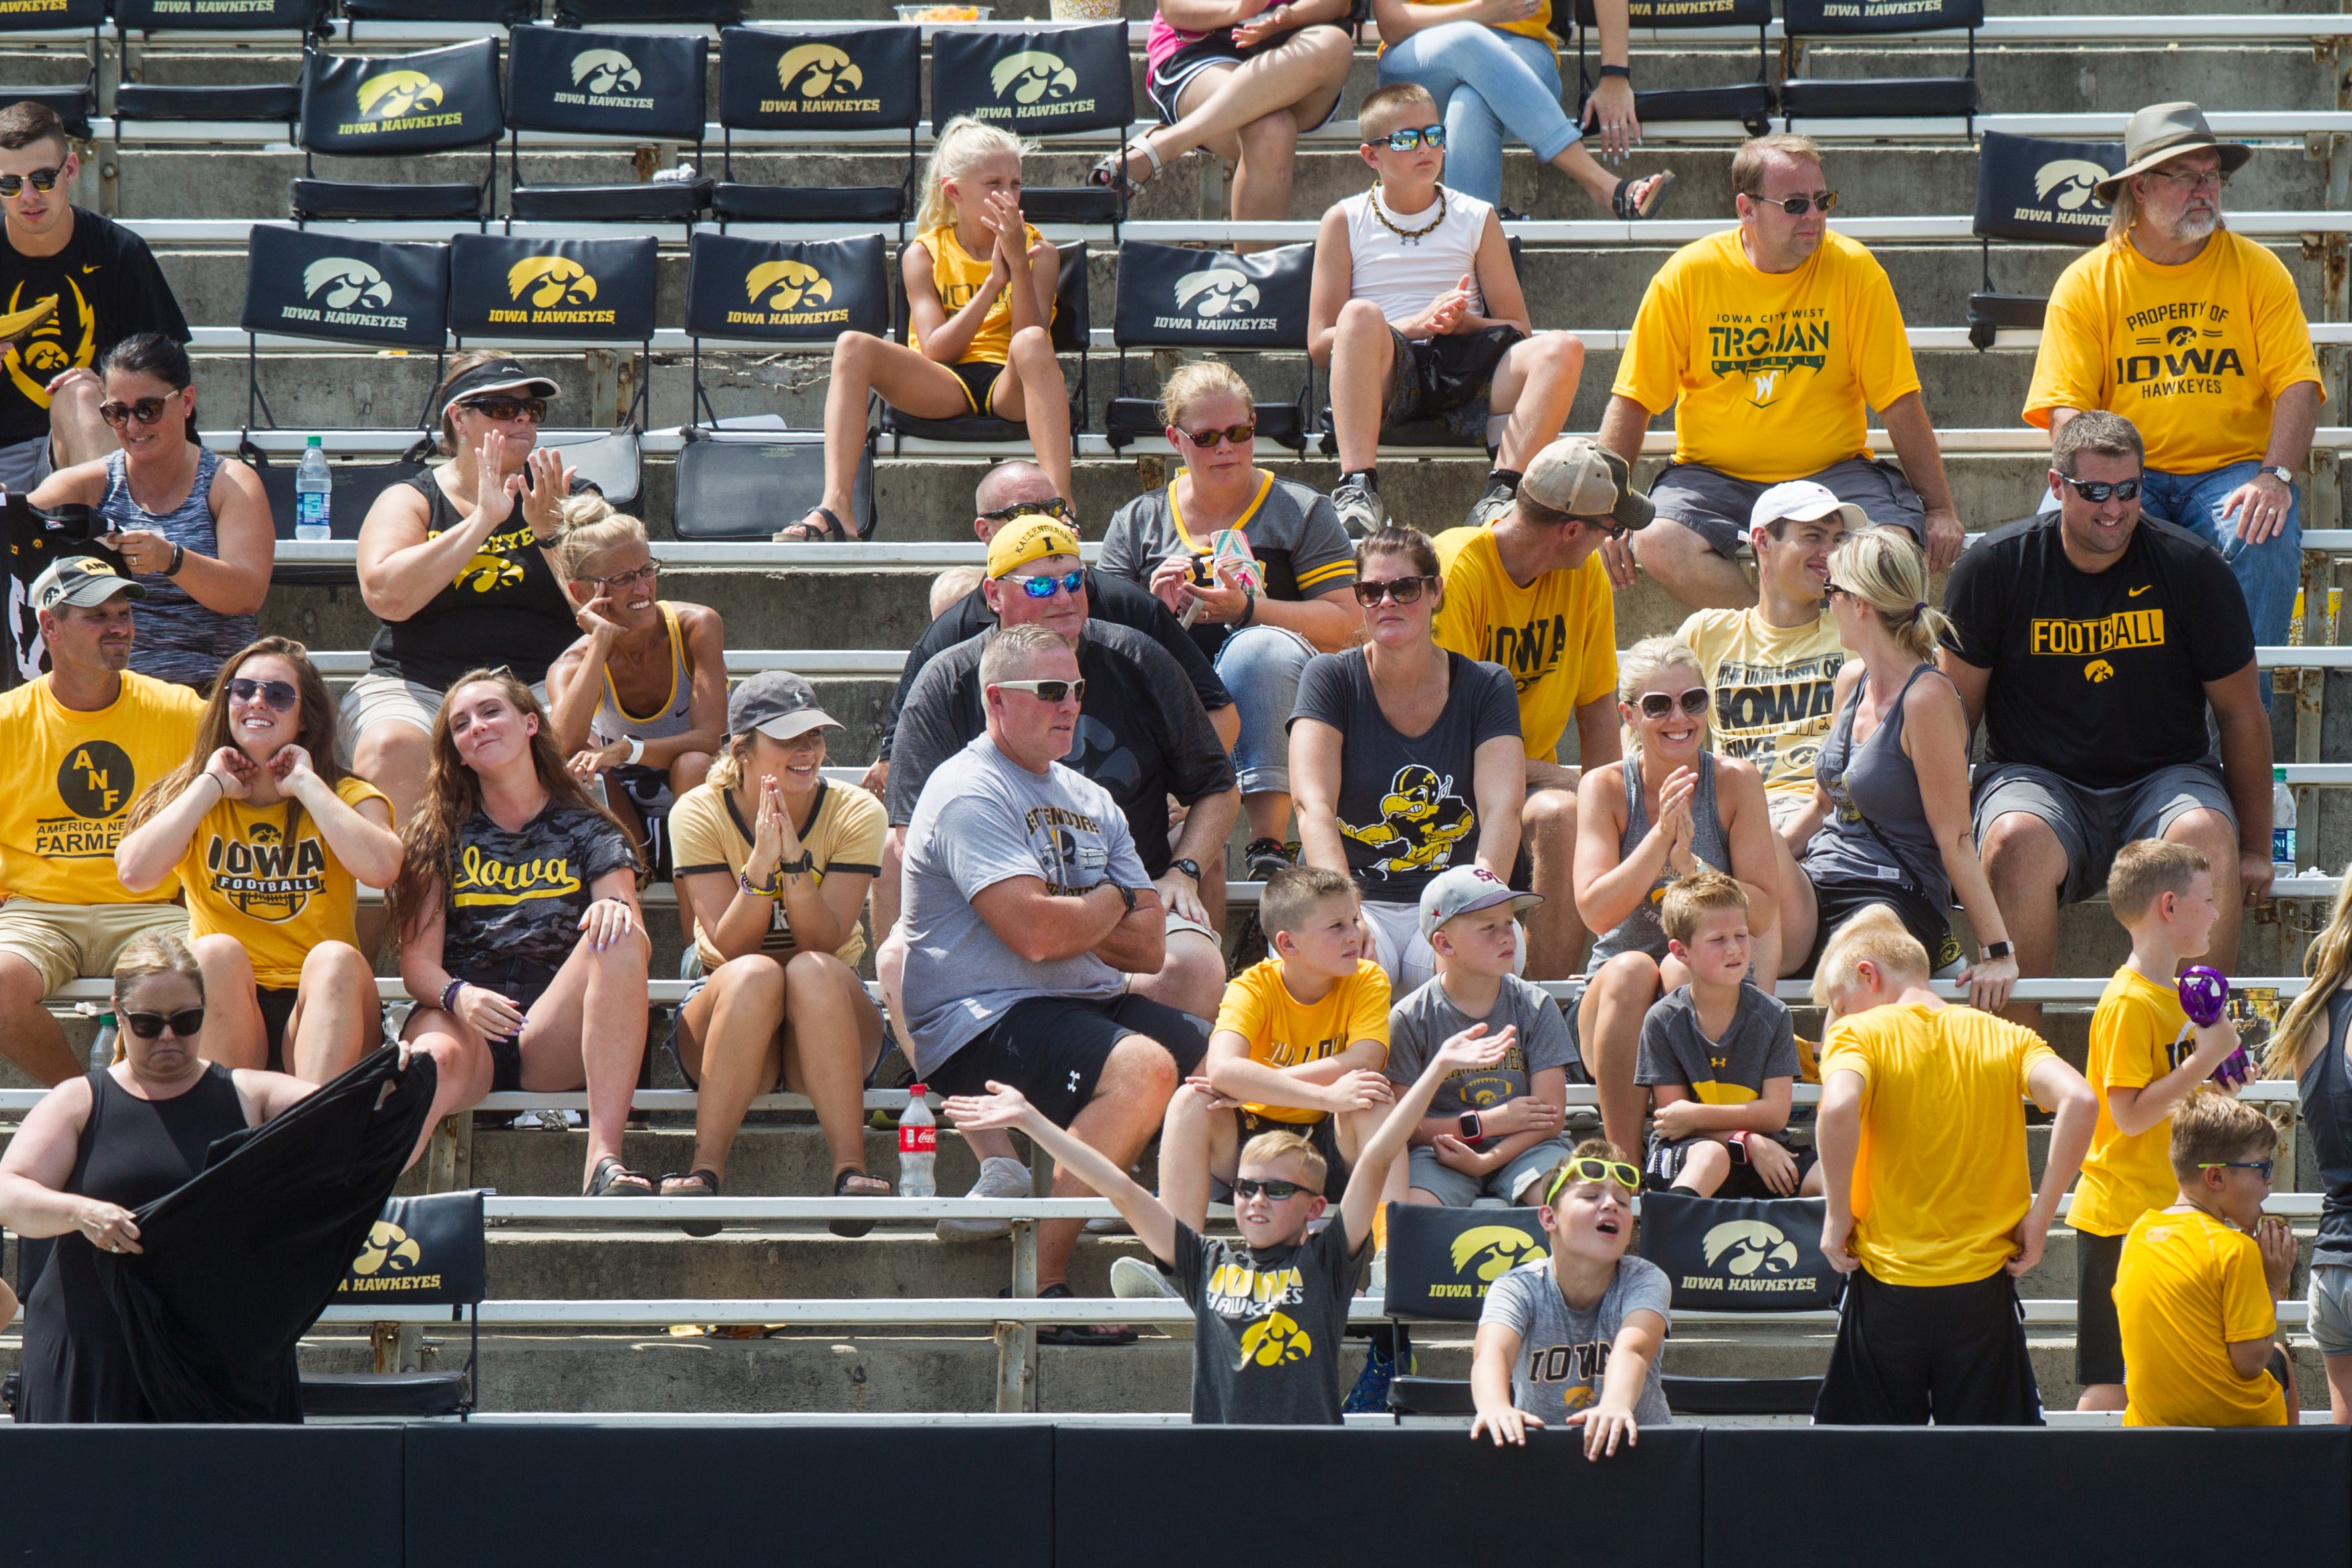 Fans cheer during a Kids Day practice on Saturday, Aug. 11, 2018, at Kinnick Stadium in Iowa City.